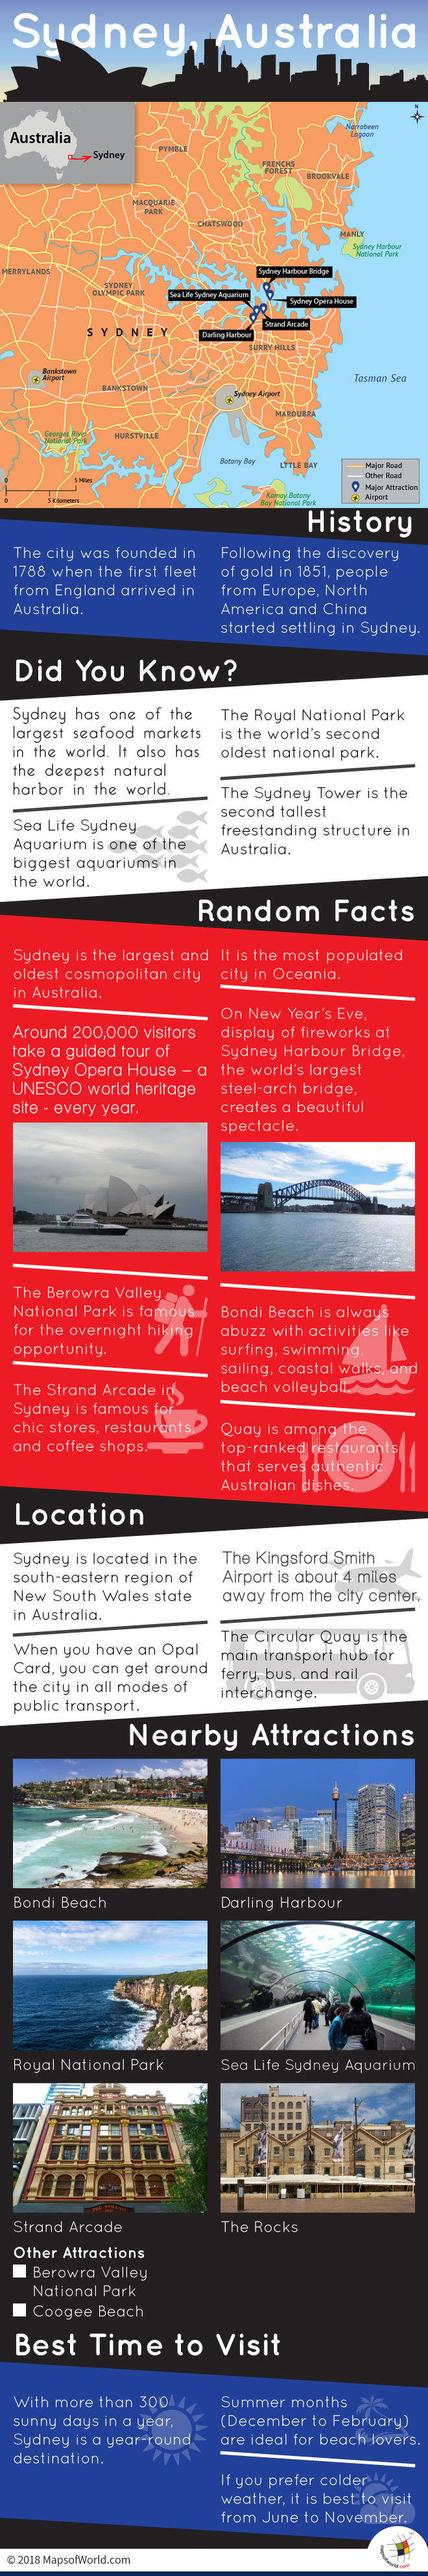 Infographic Depicting Sydney Tourist Attractions